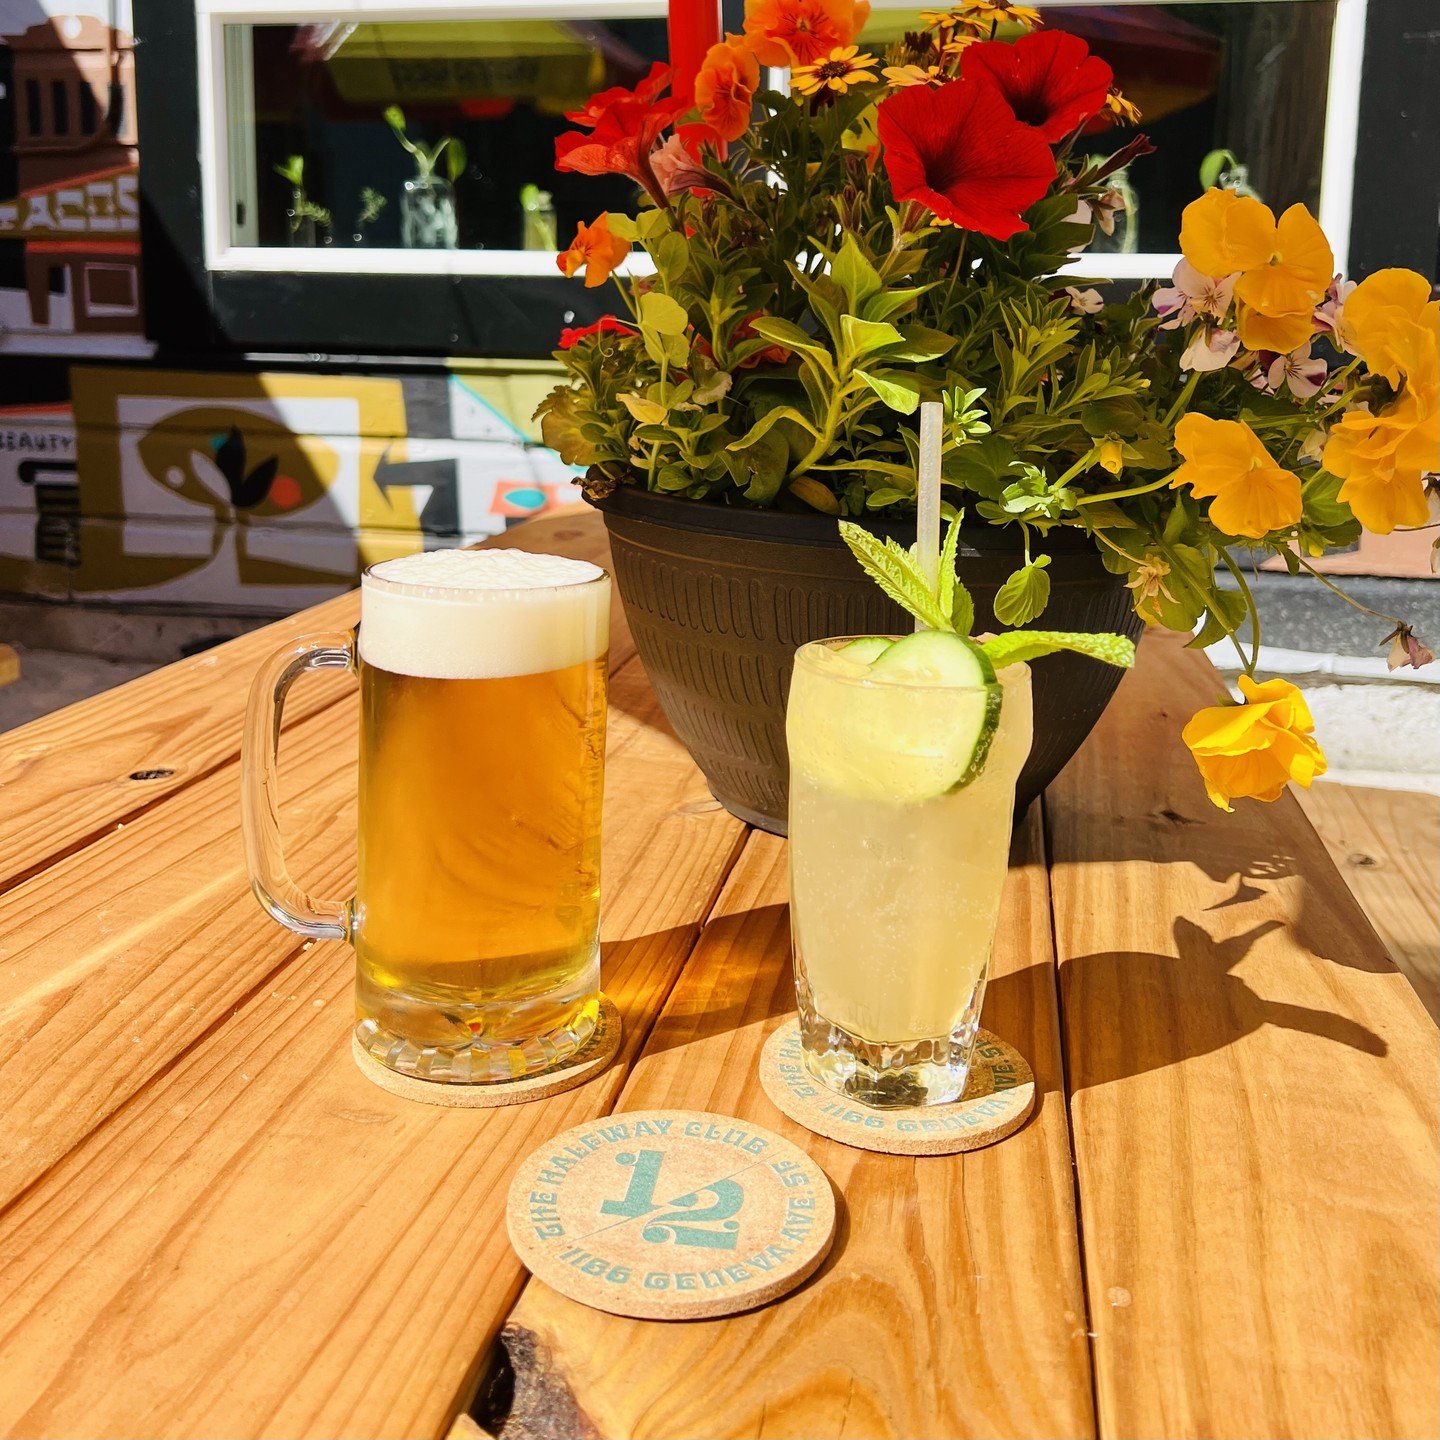 Flowers are in bloom, the @enterprisebrewingco Pilsner is cold and we've got this delicious 5-Spice Cucumber Cooler on tap today. Vodka, lemon, mint and soda combine with the spices to make a refreshing patio cocktail that keeps you coming back for a